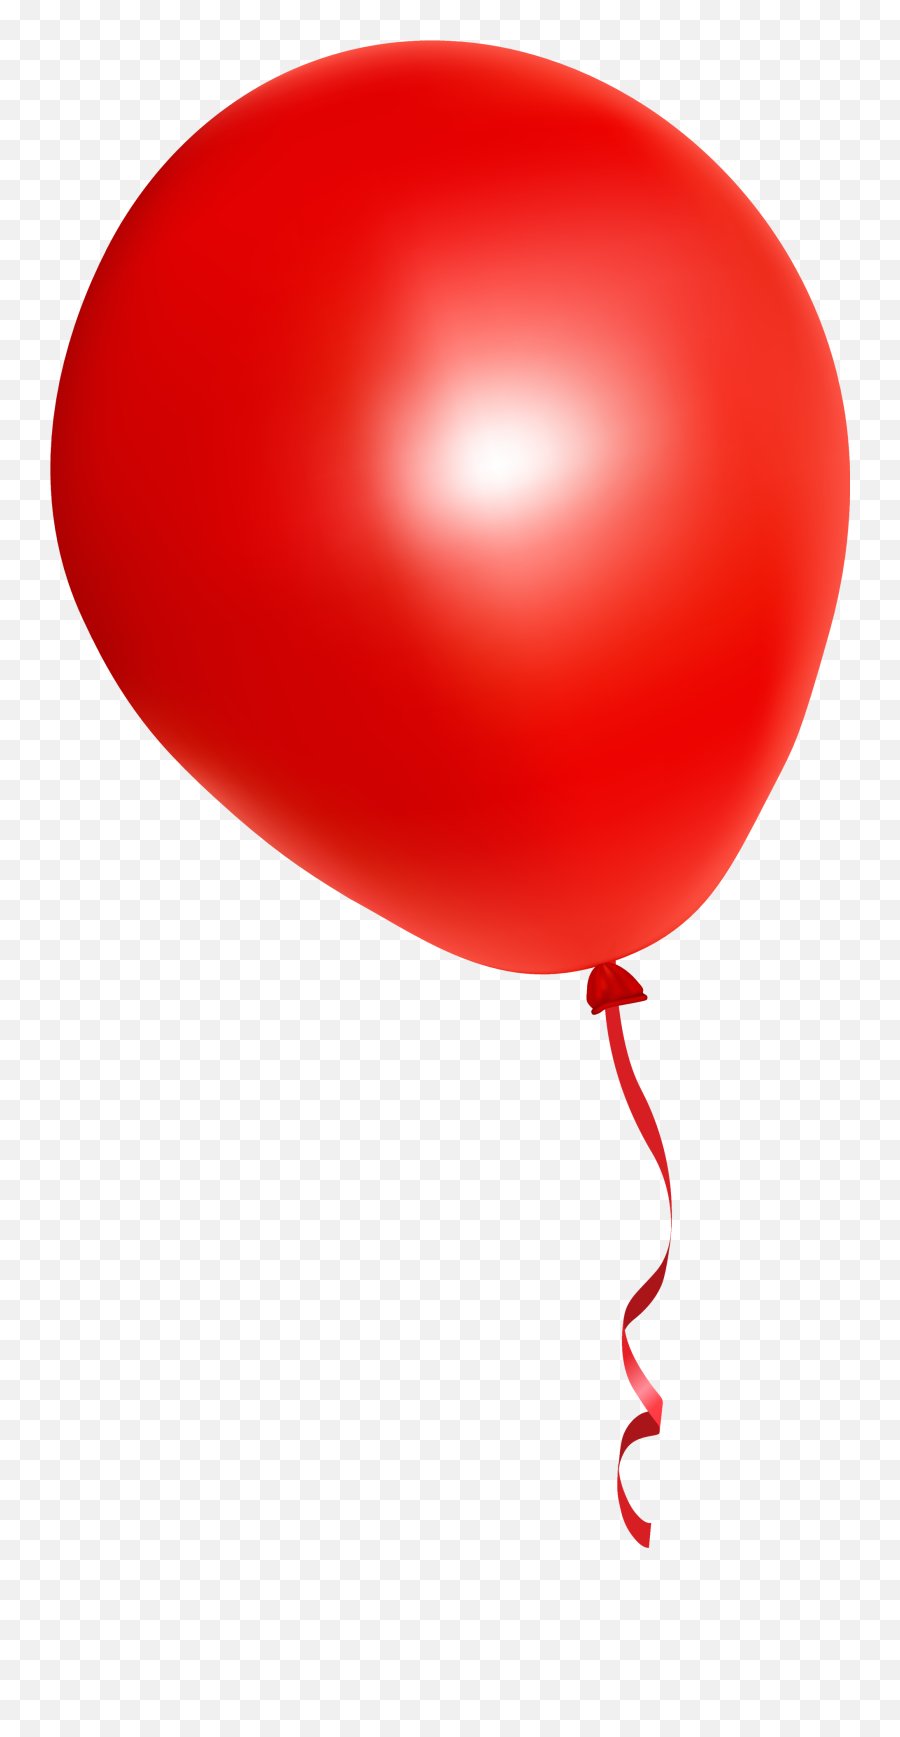 Download Hd Image Result For Red - Red Balloon Png Emoji,Red Balloon Emoji